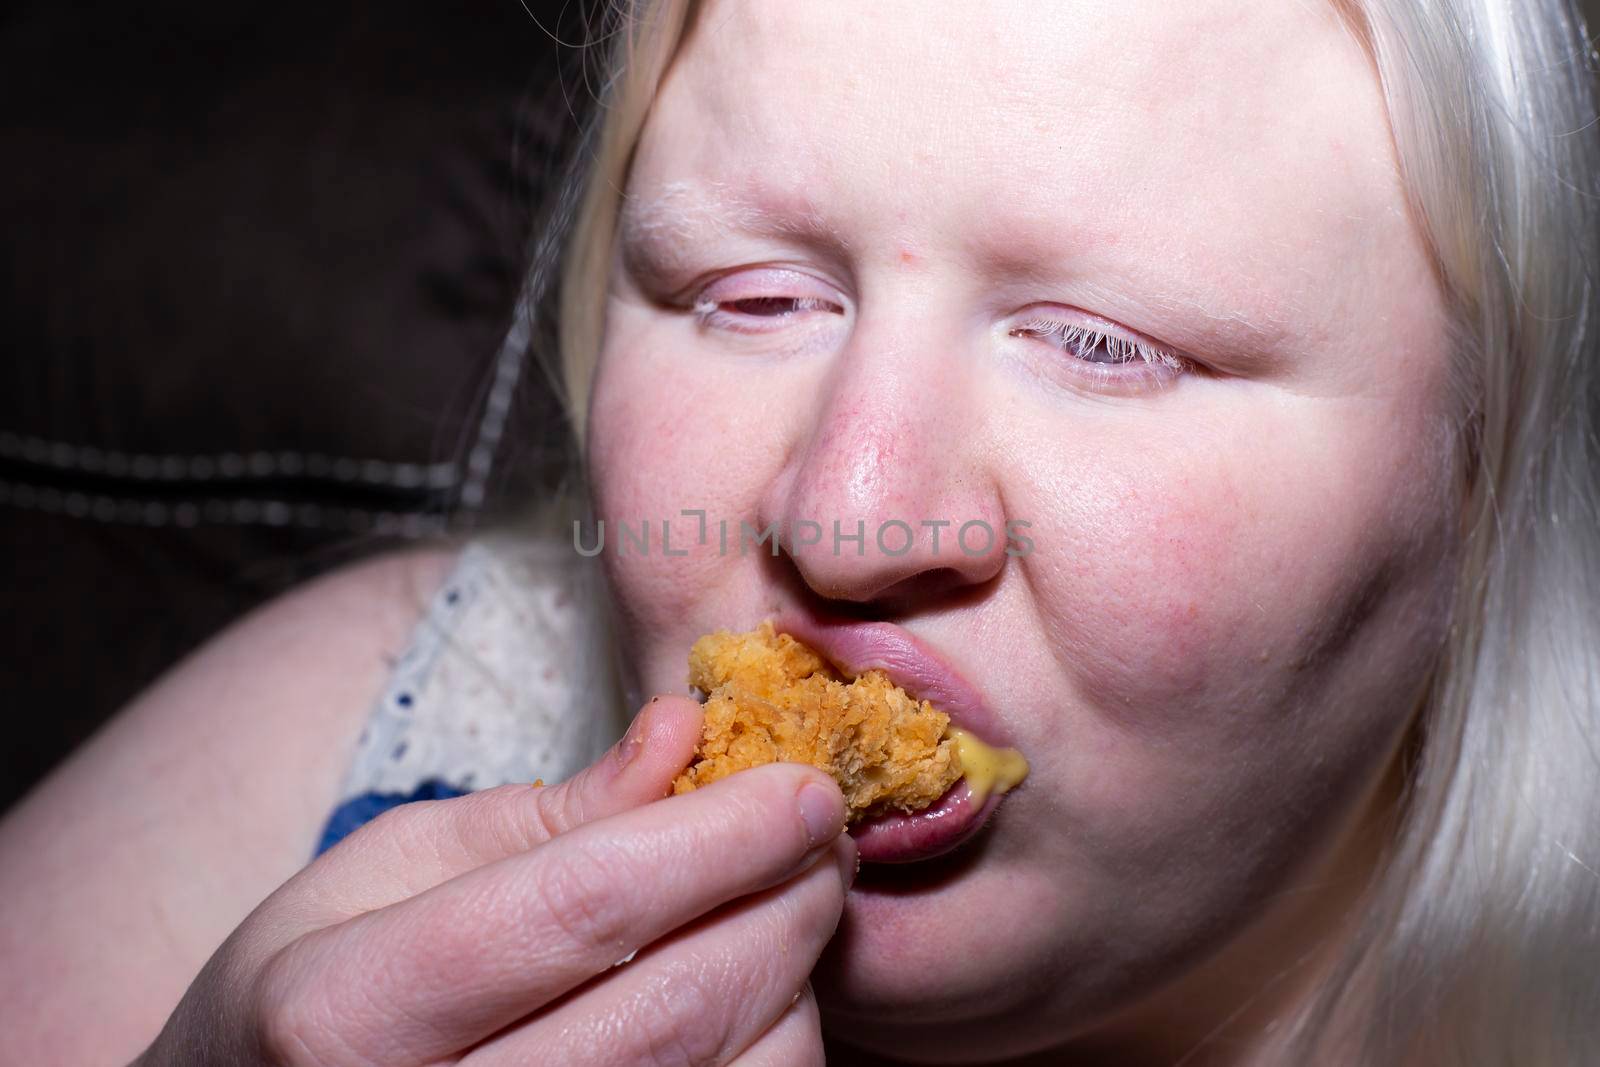 Obese, albino woman eating a chicken tender happily